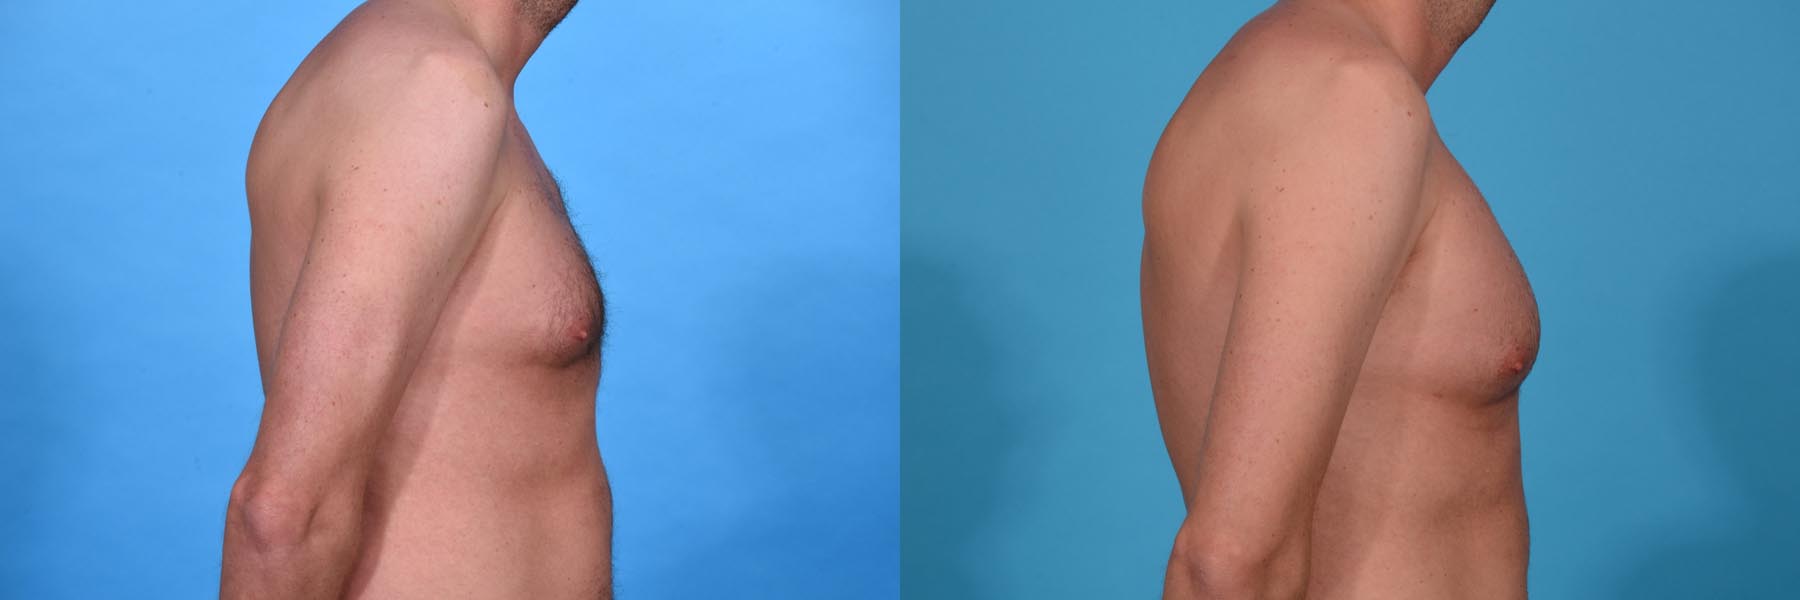 Pectoral Augmentation Before and After Photo by Sculpt Aesthetic Center in Frisco, TX